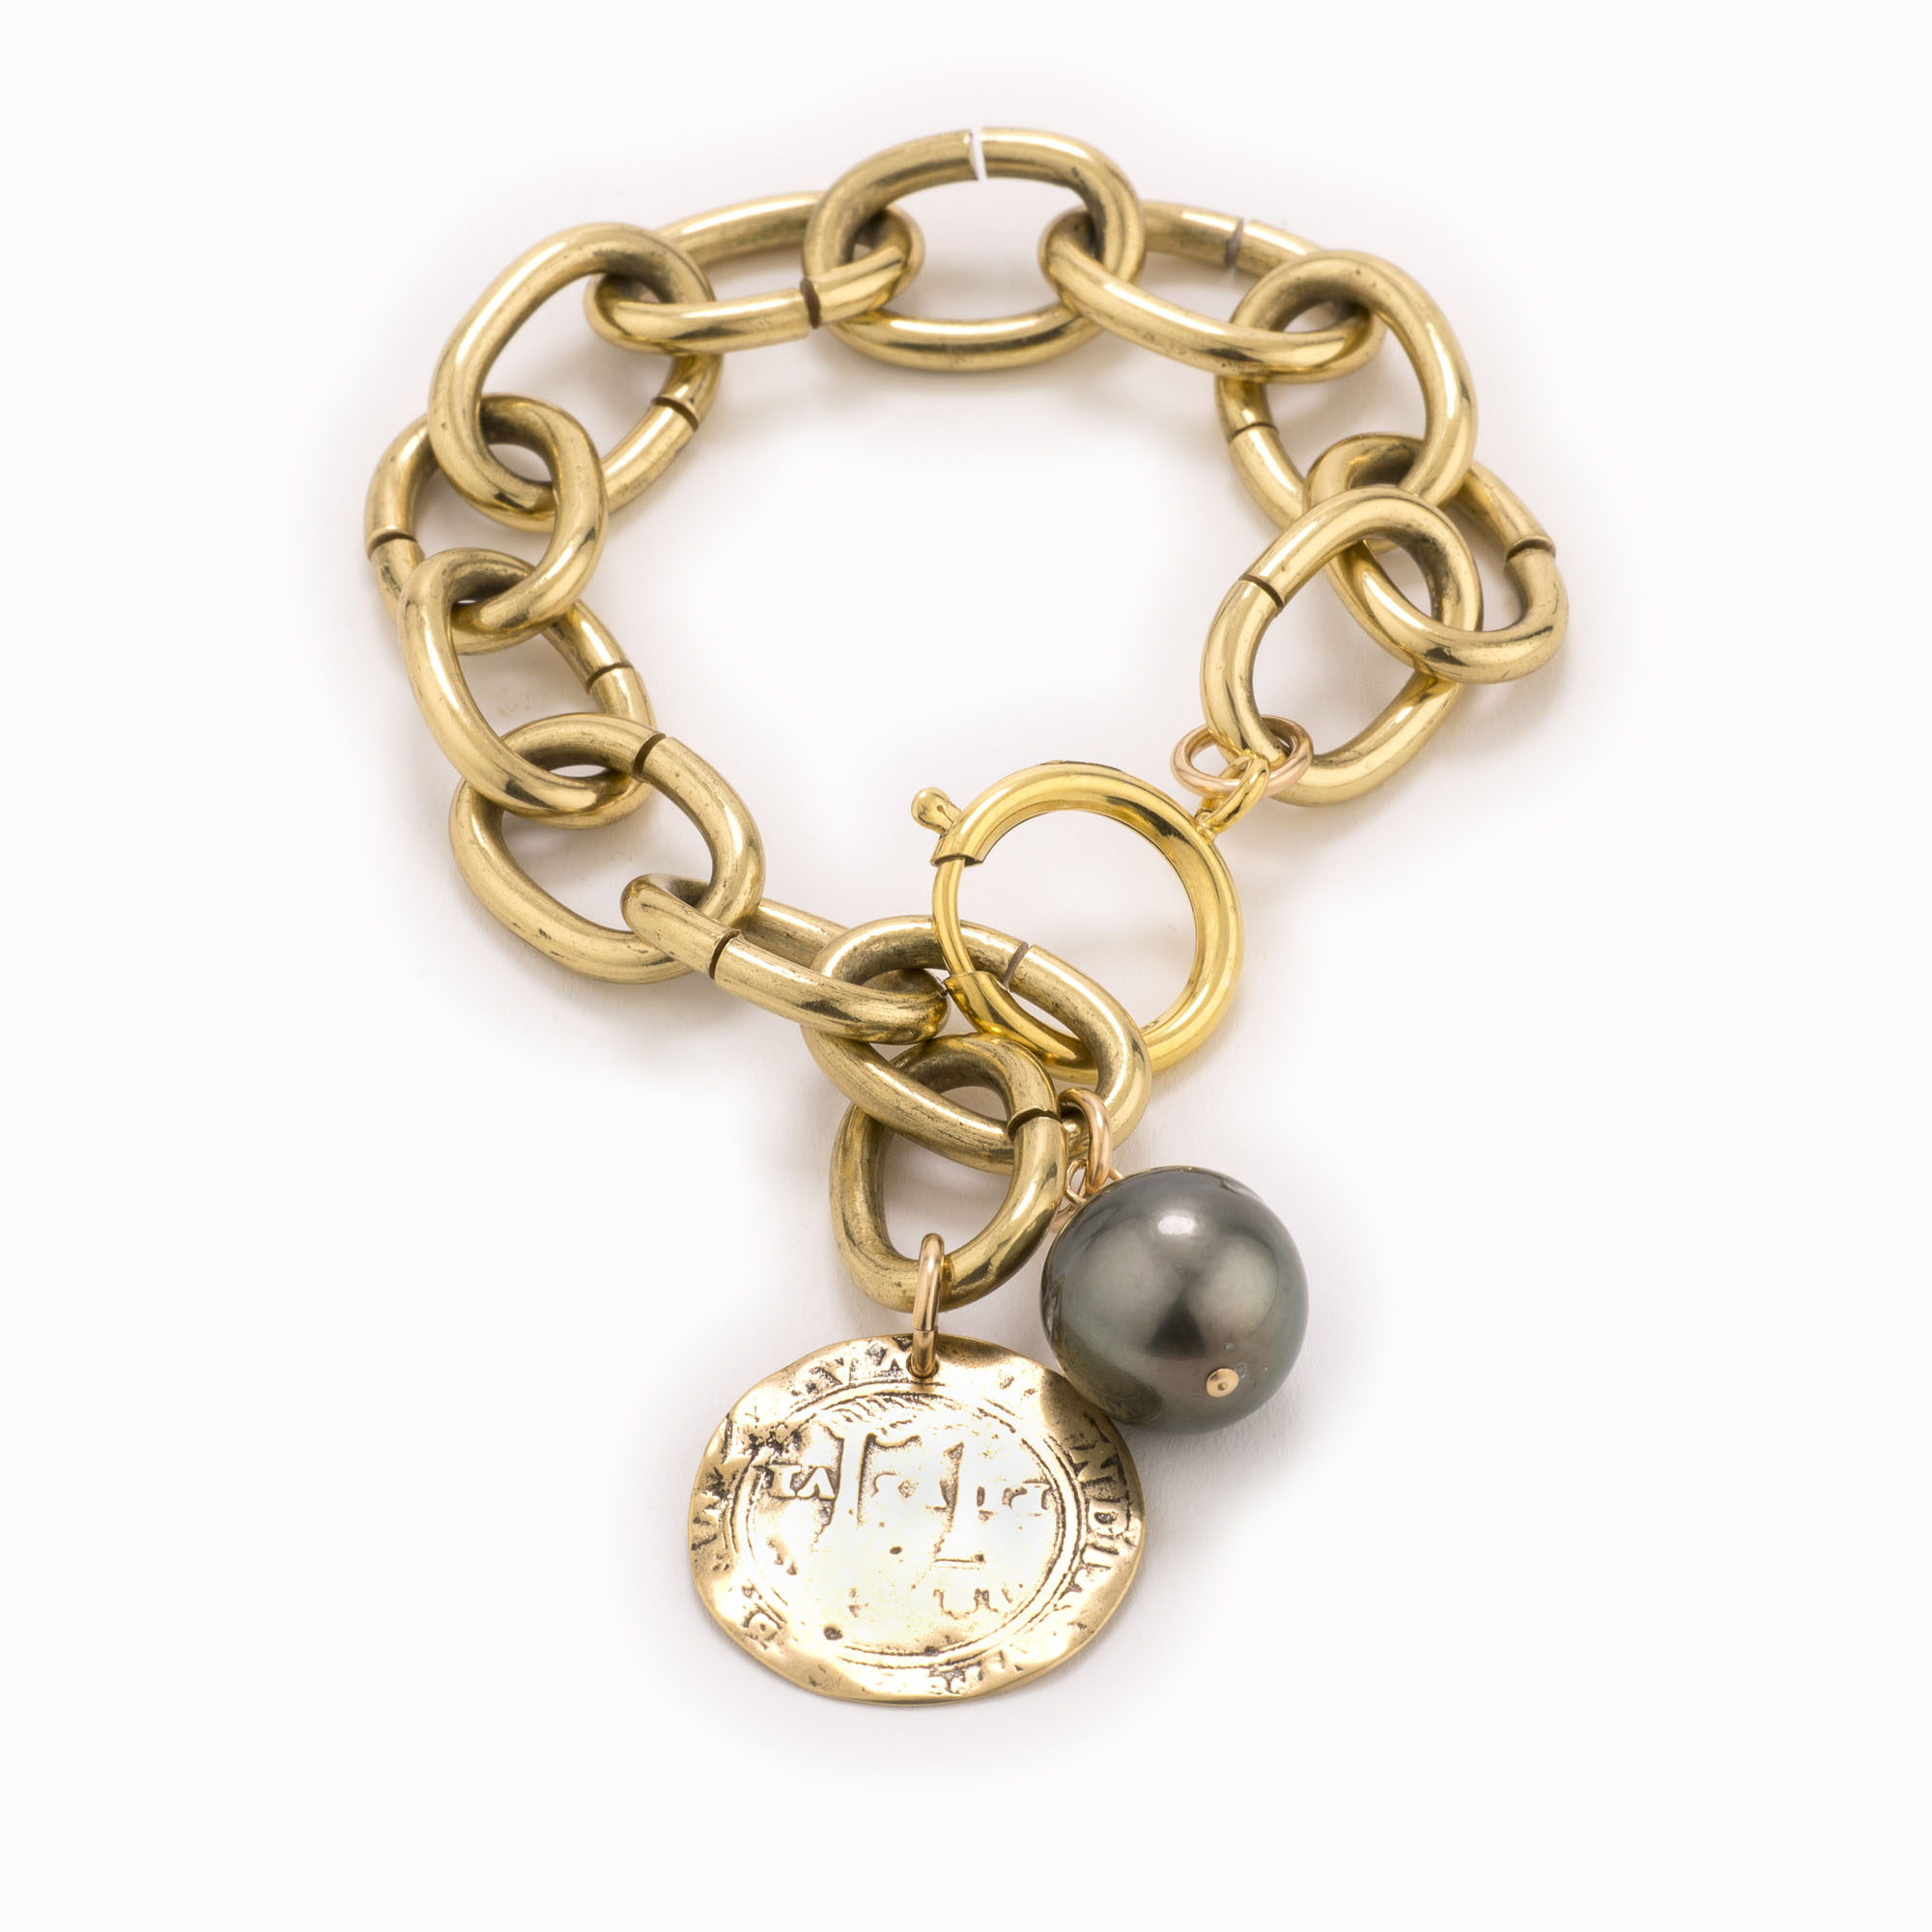 Featured image for “Pluto Brass Bracelet”